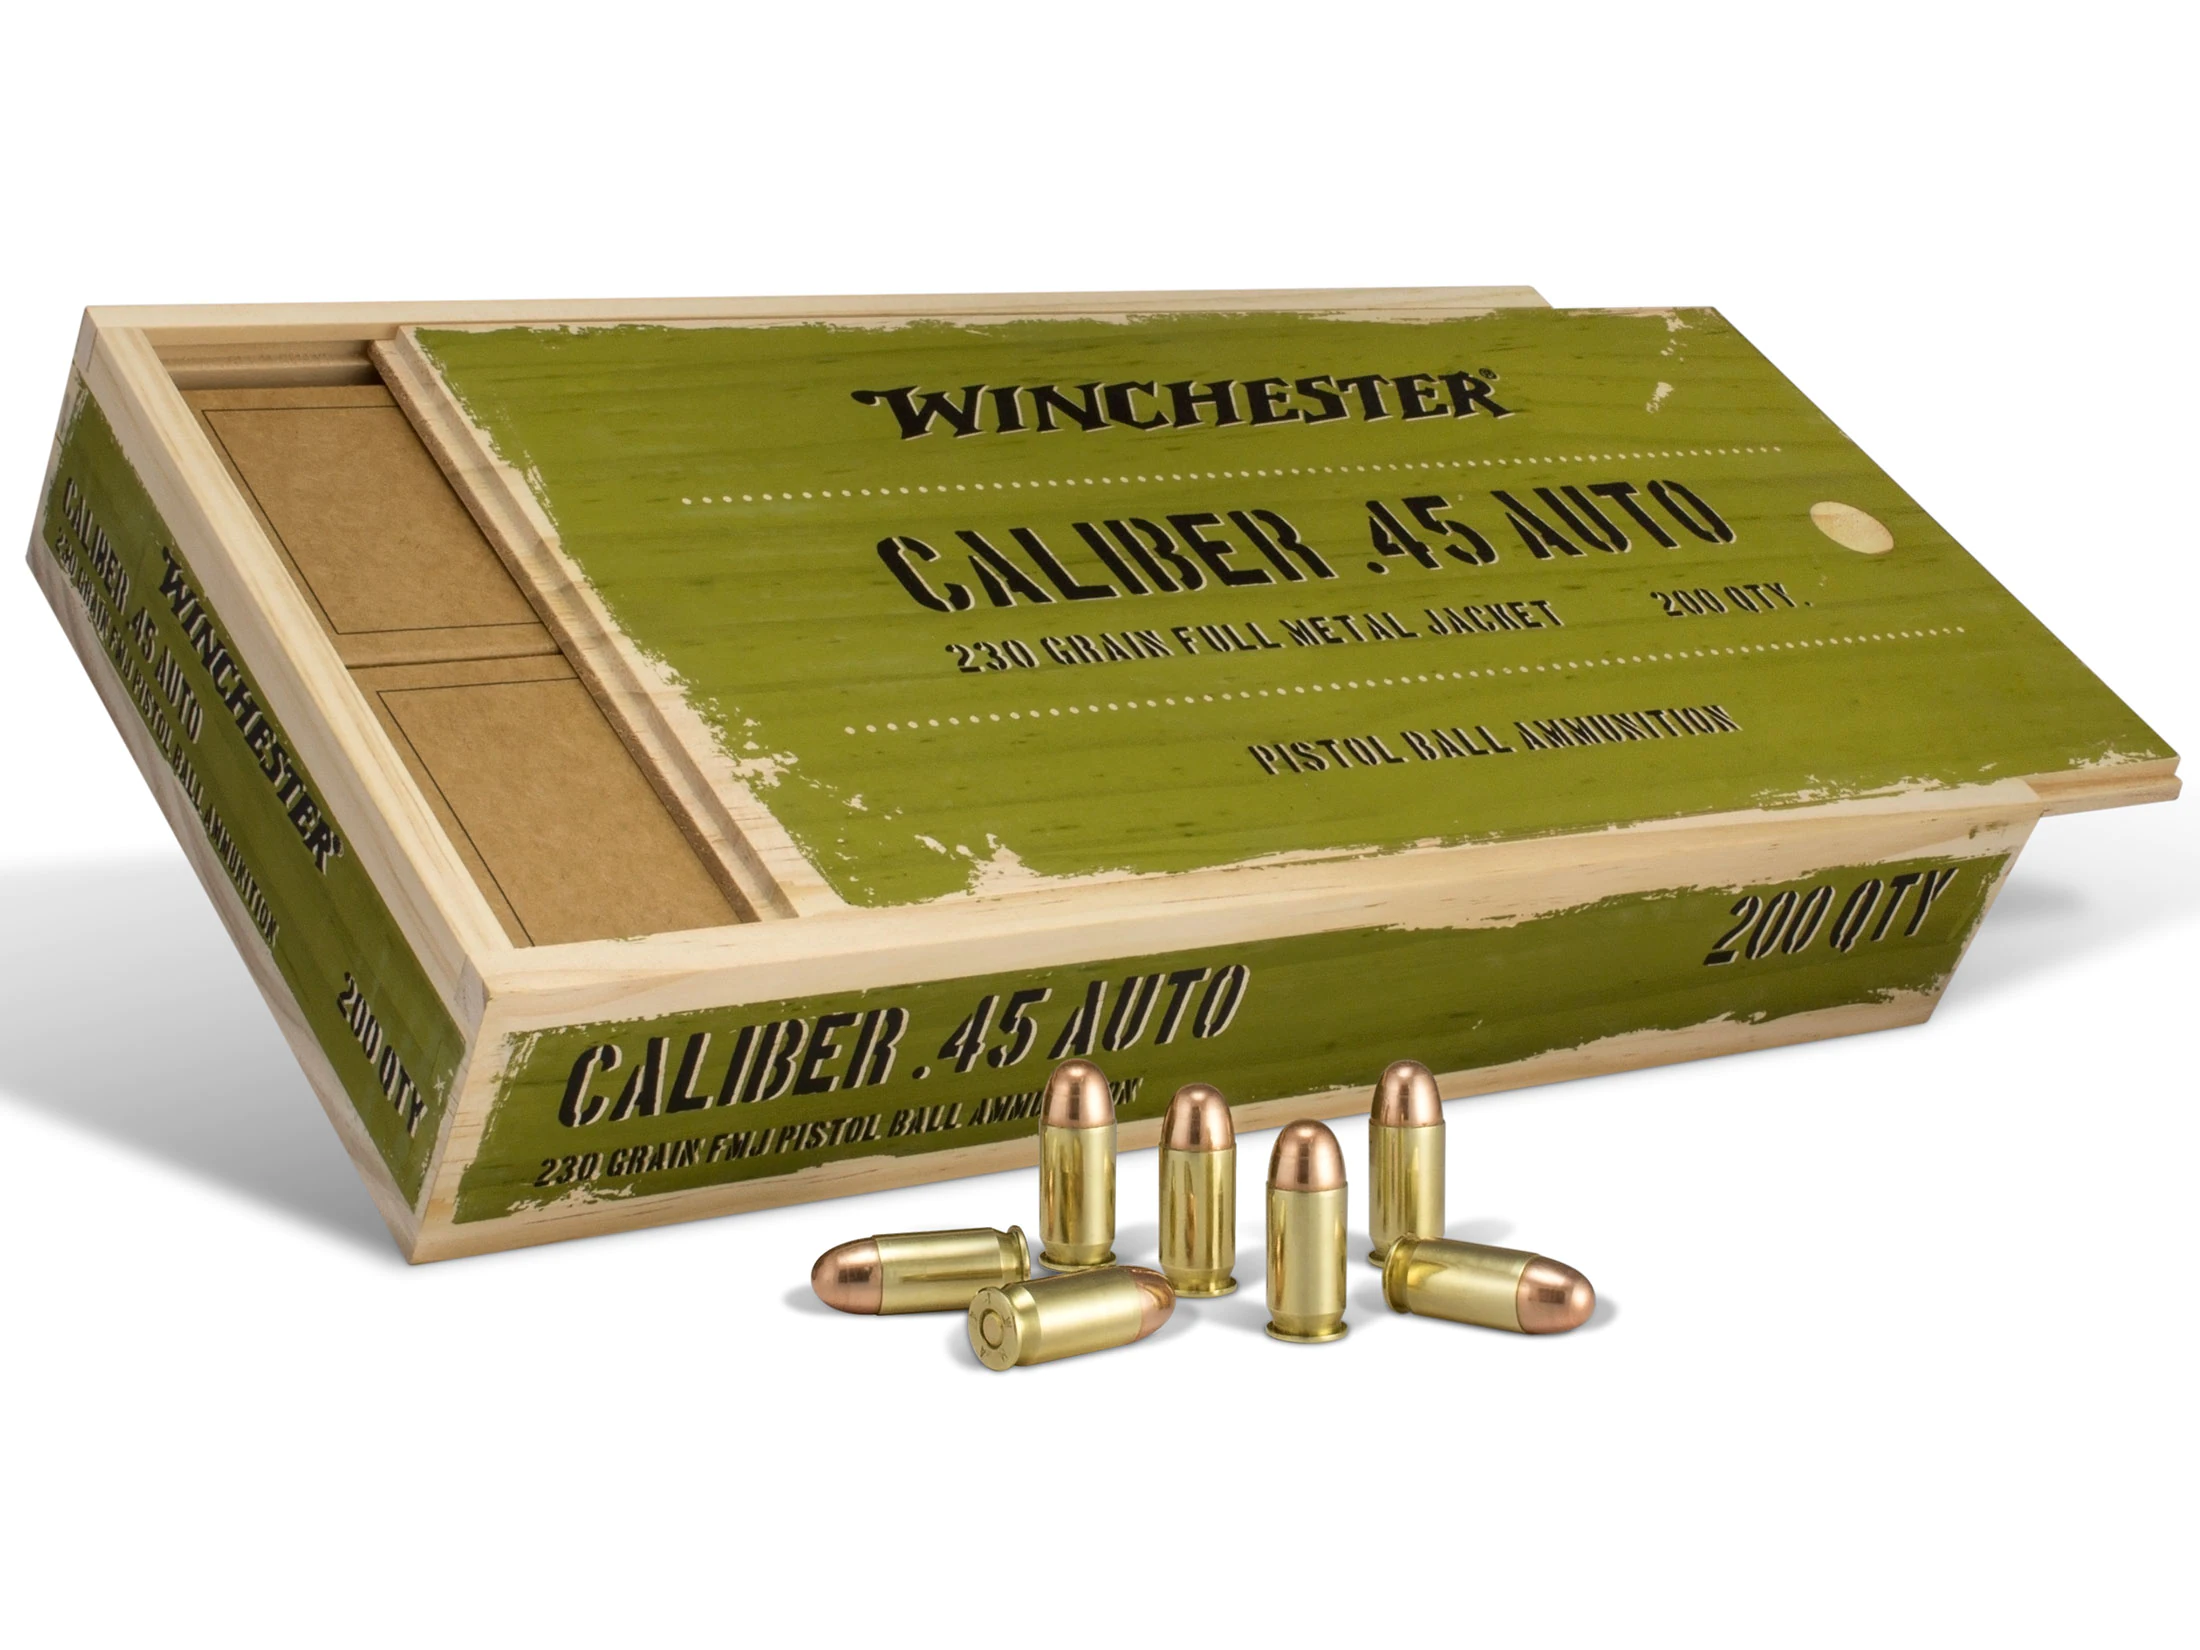 Image of Winchester Limited Edition Service Grade Ammo In Collectible Wood Box 45 ACP 230gr, FMJ, 4x50rd Boxes, 200rds